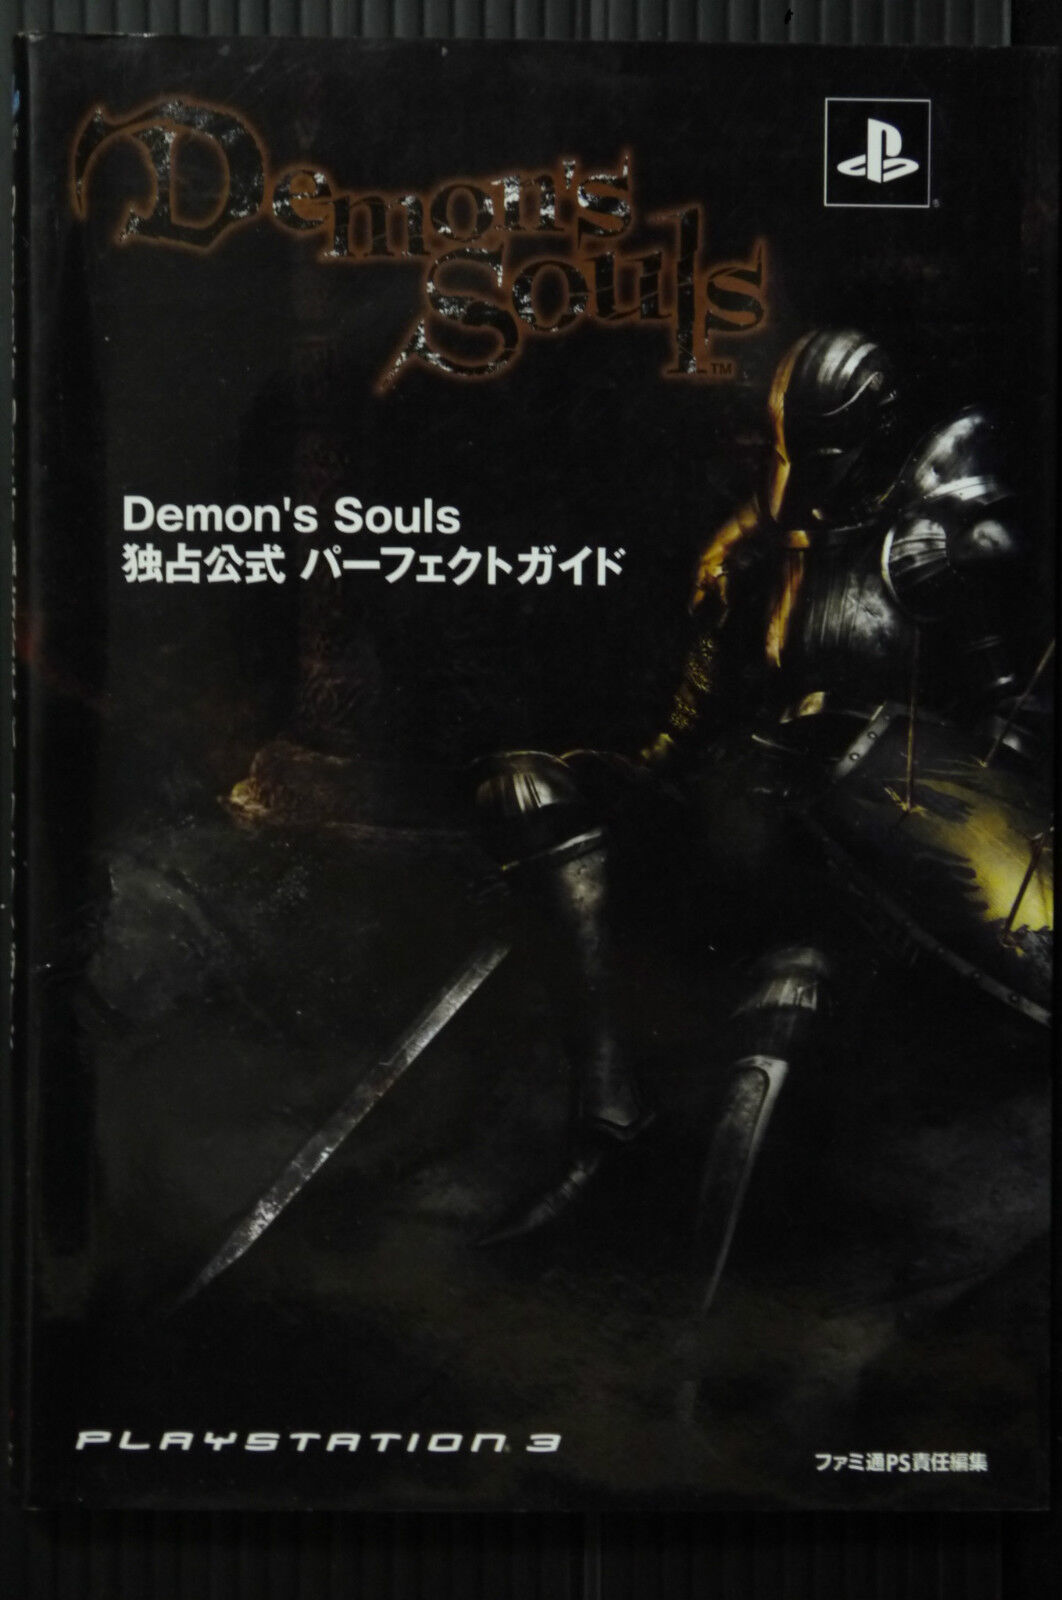 JAPAN Demon's Souls Monopoly Official Perfect Guide book